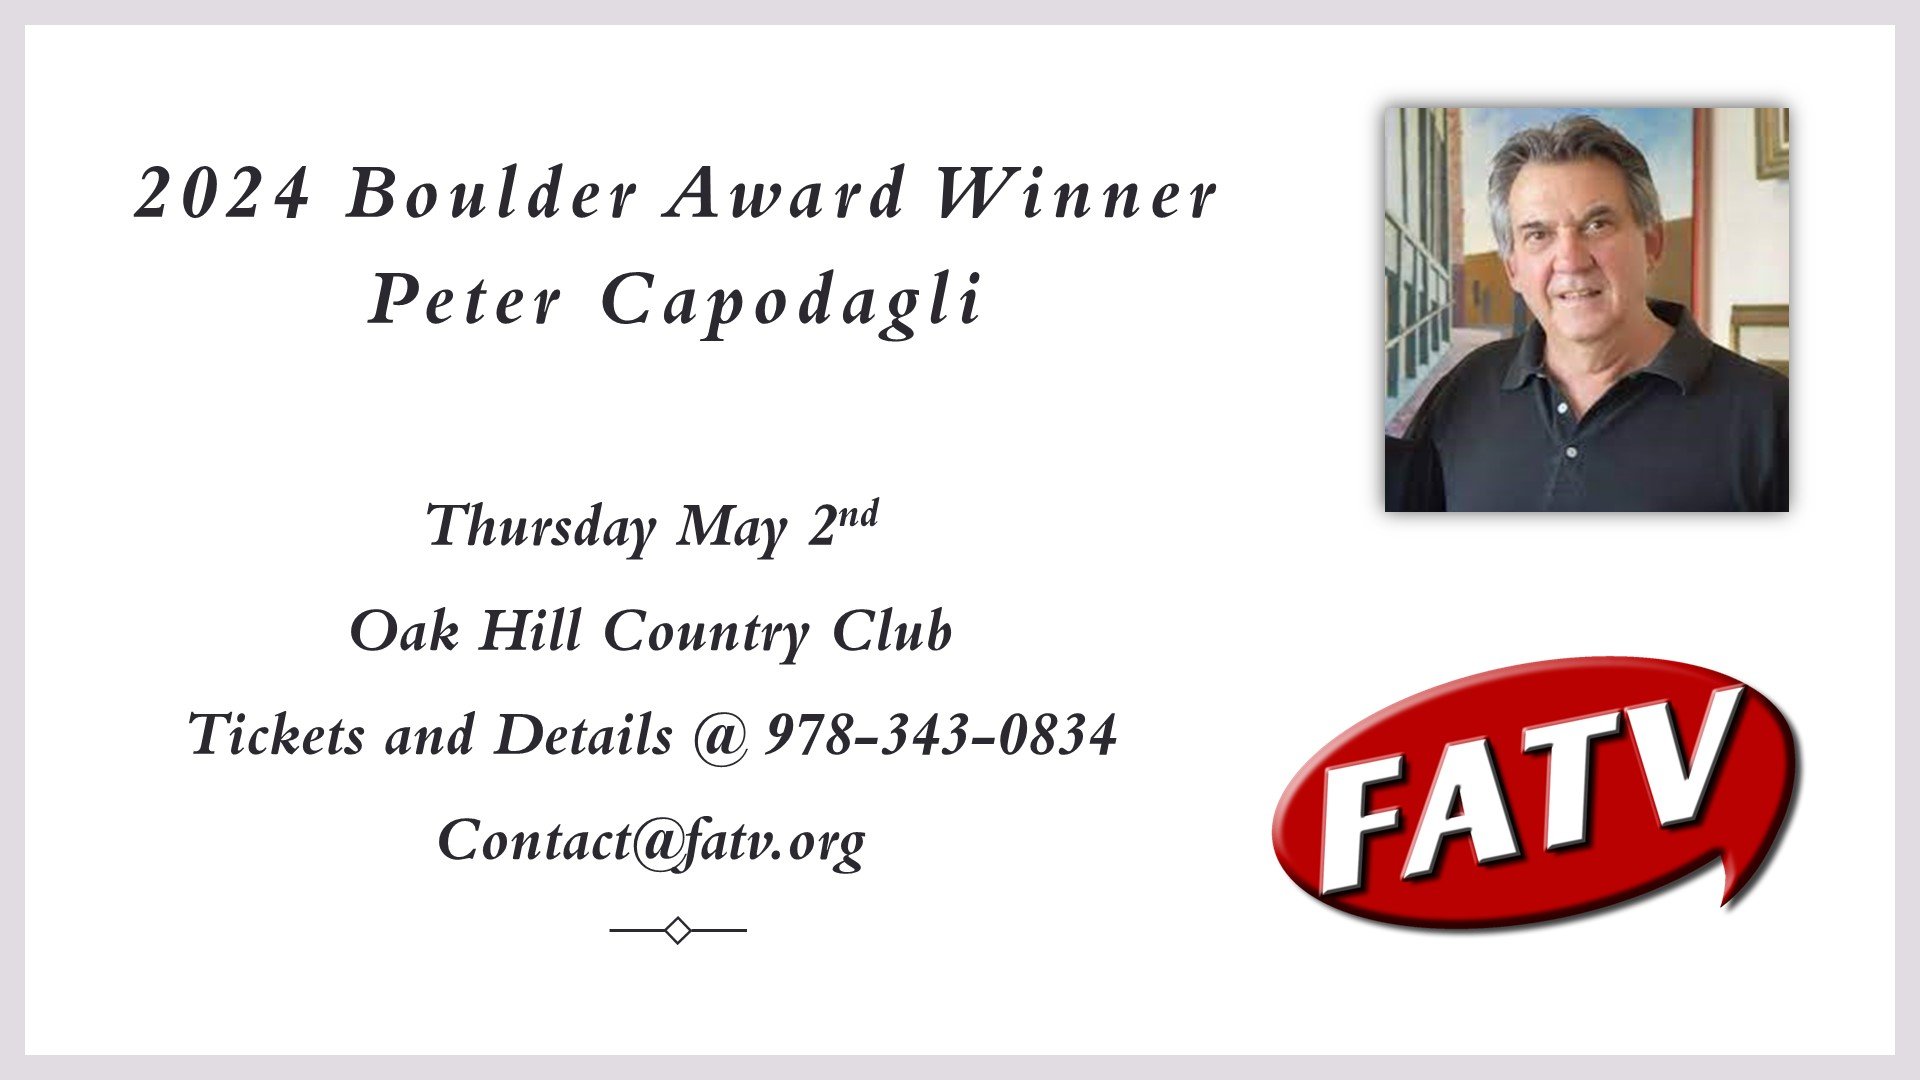 The 2024 Boulder Award goes to...Peter Capodagli!
Join FATV Thursday, May 2, 2024 at Oak Hill Country Club
As we celebrate Peter and the FATV member award recipients.
Tickets are available now through Friday, April 26, 2024. 
Call FATV at 978-343-083